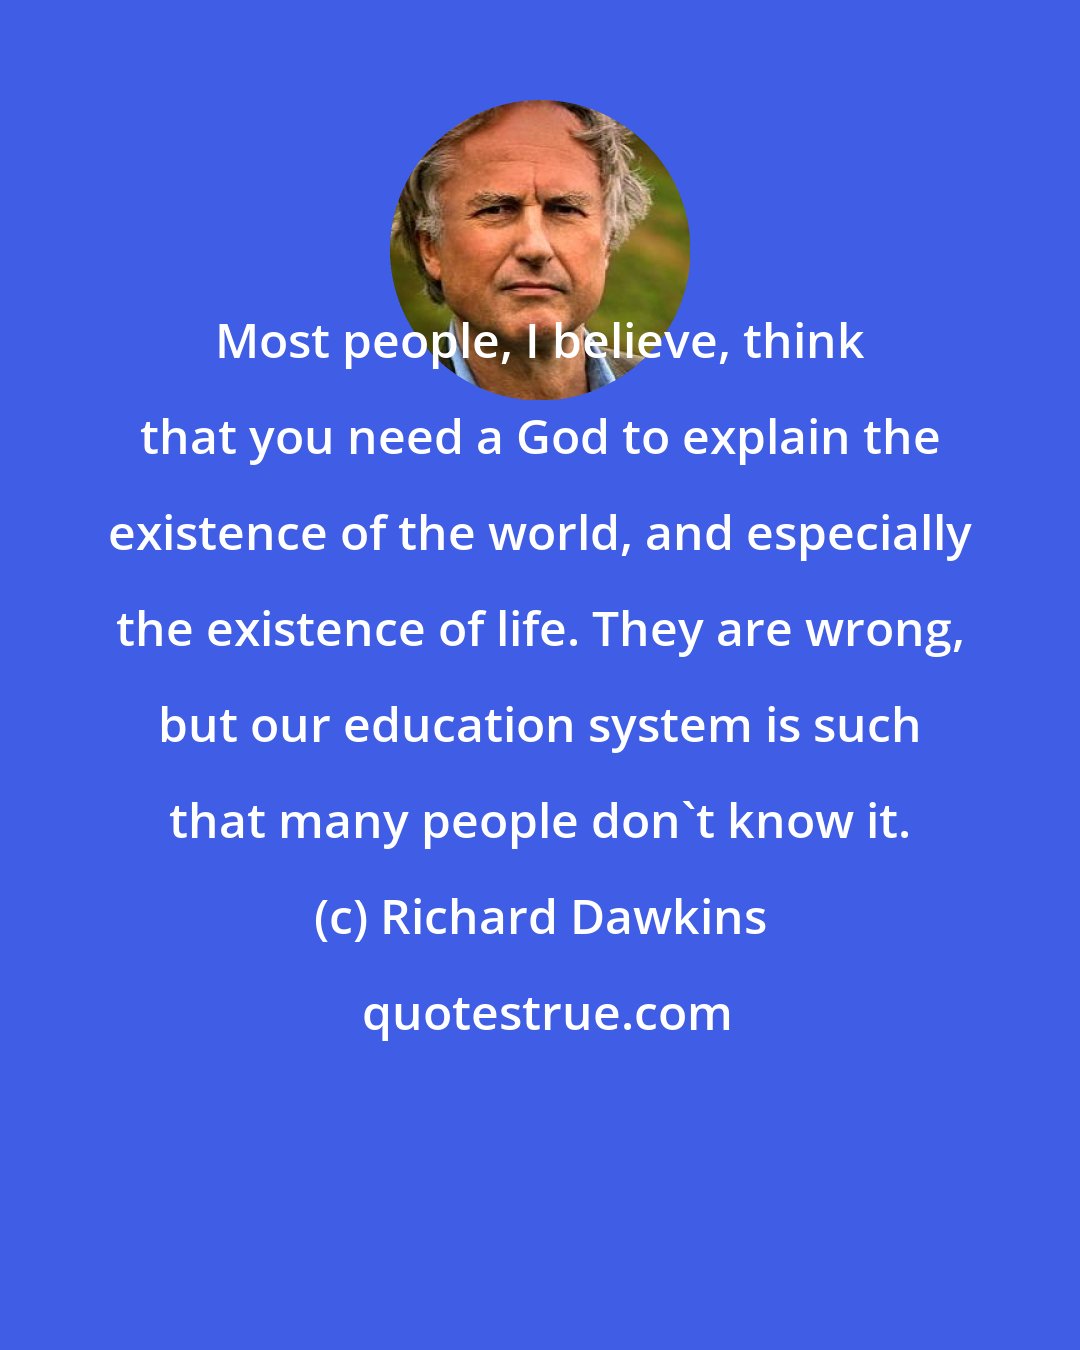 Richard Dawkins: Most people, I believe, think that you need a God to explain the existence of the world, and especially the existence of life. They are wrong, but our education system is such that many people don't know it.